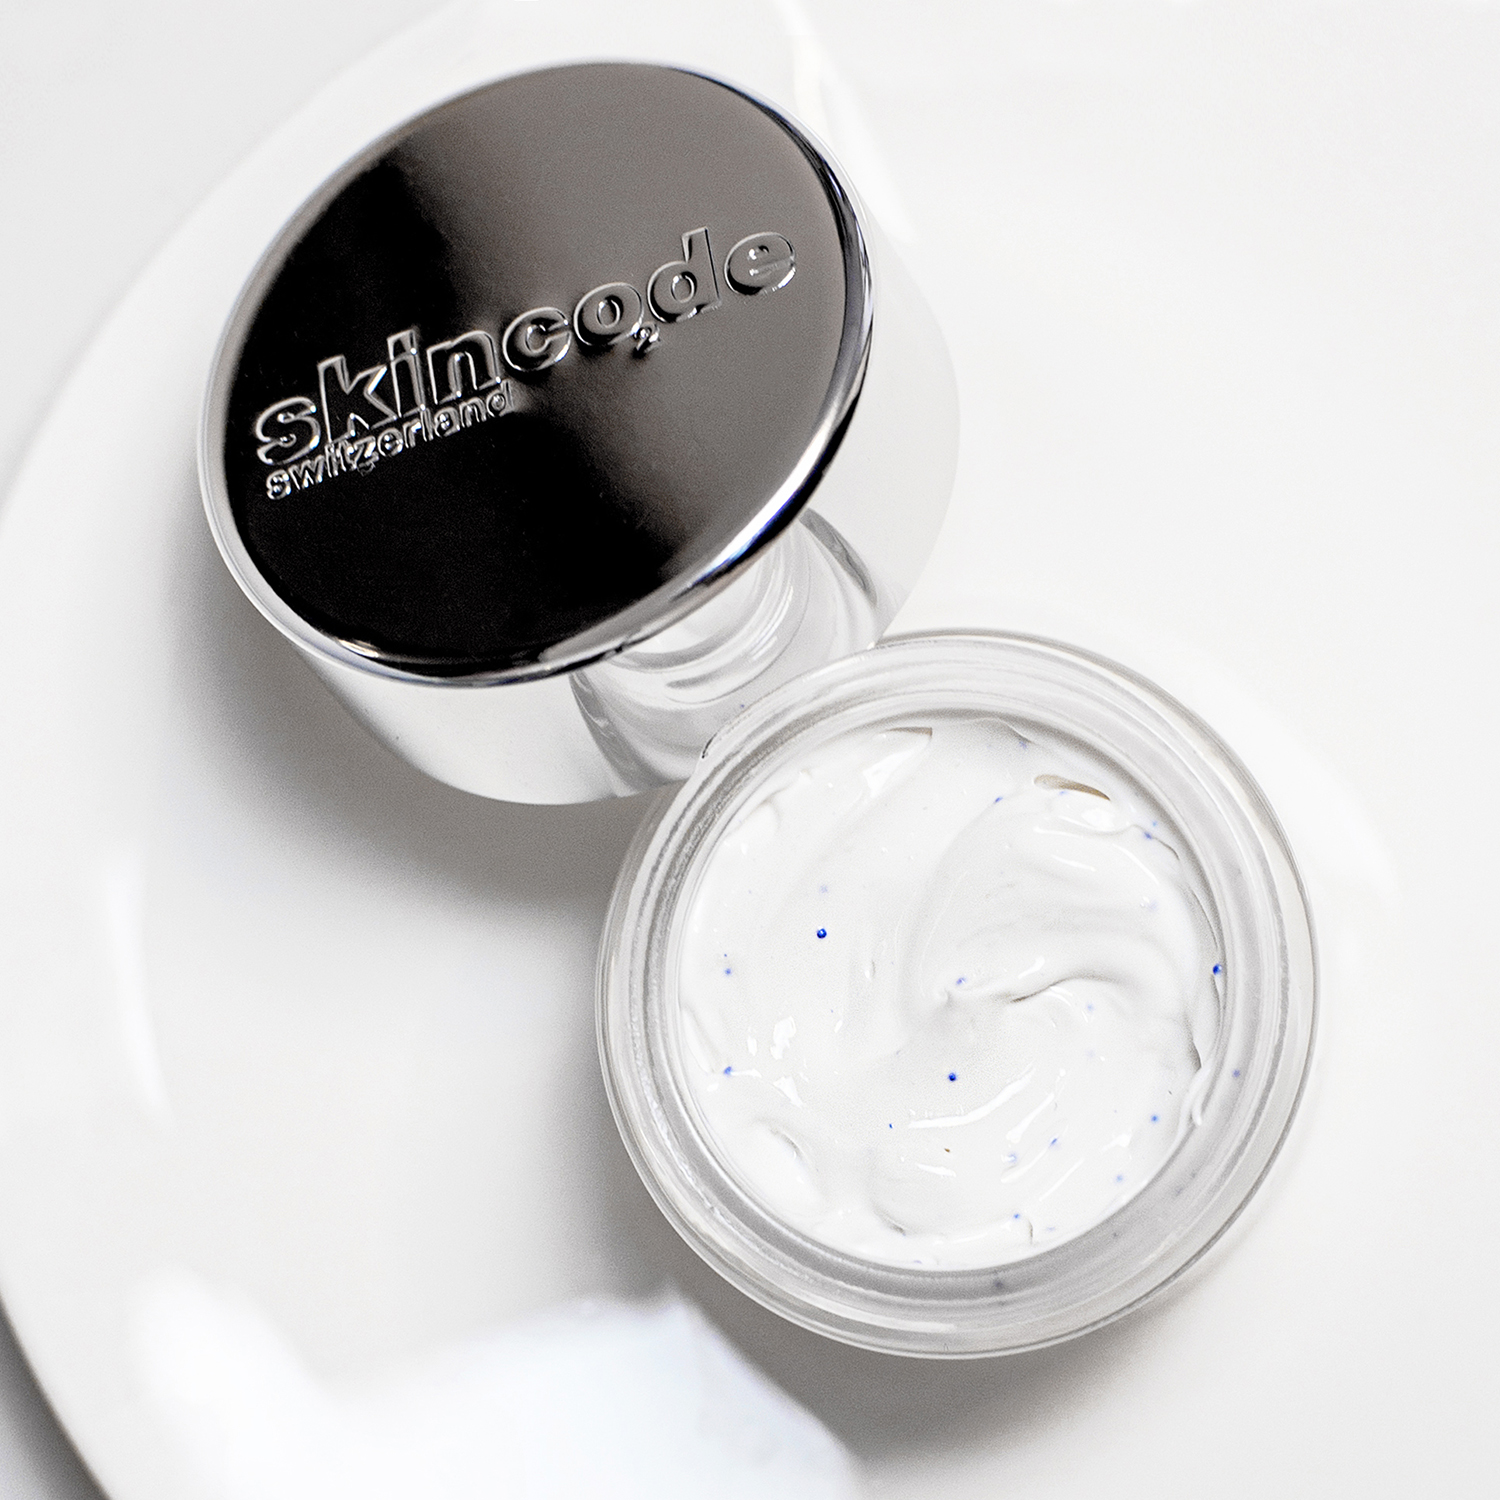 Skincode cellular anti-aging cream review